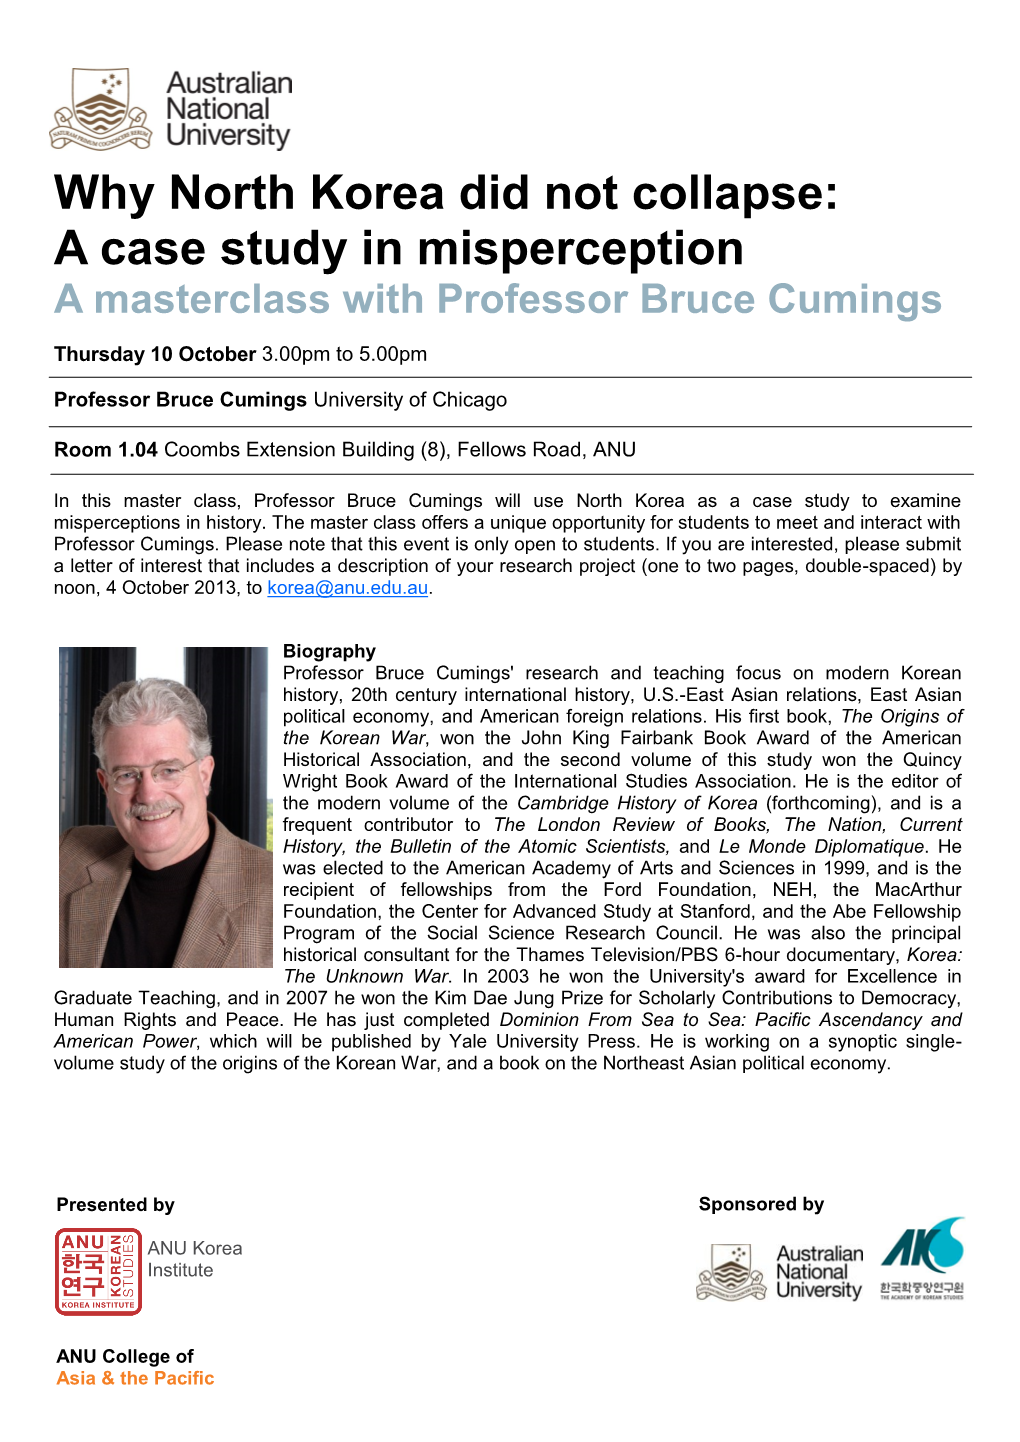 Why North Korea Did Not Collapse: a Case Study in Misperception a Masterclass with Professor Bruce Cumings Thursday 10 October 3.00Pm to 5.00Pm